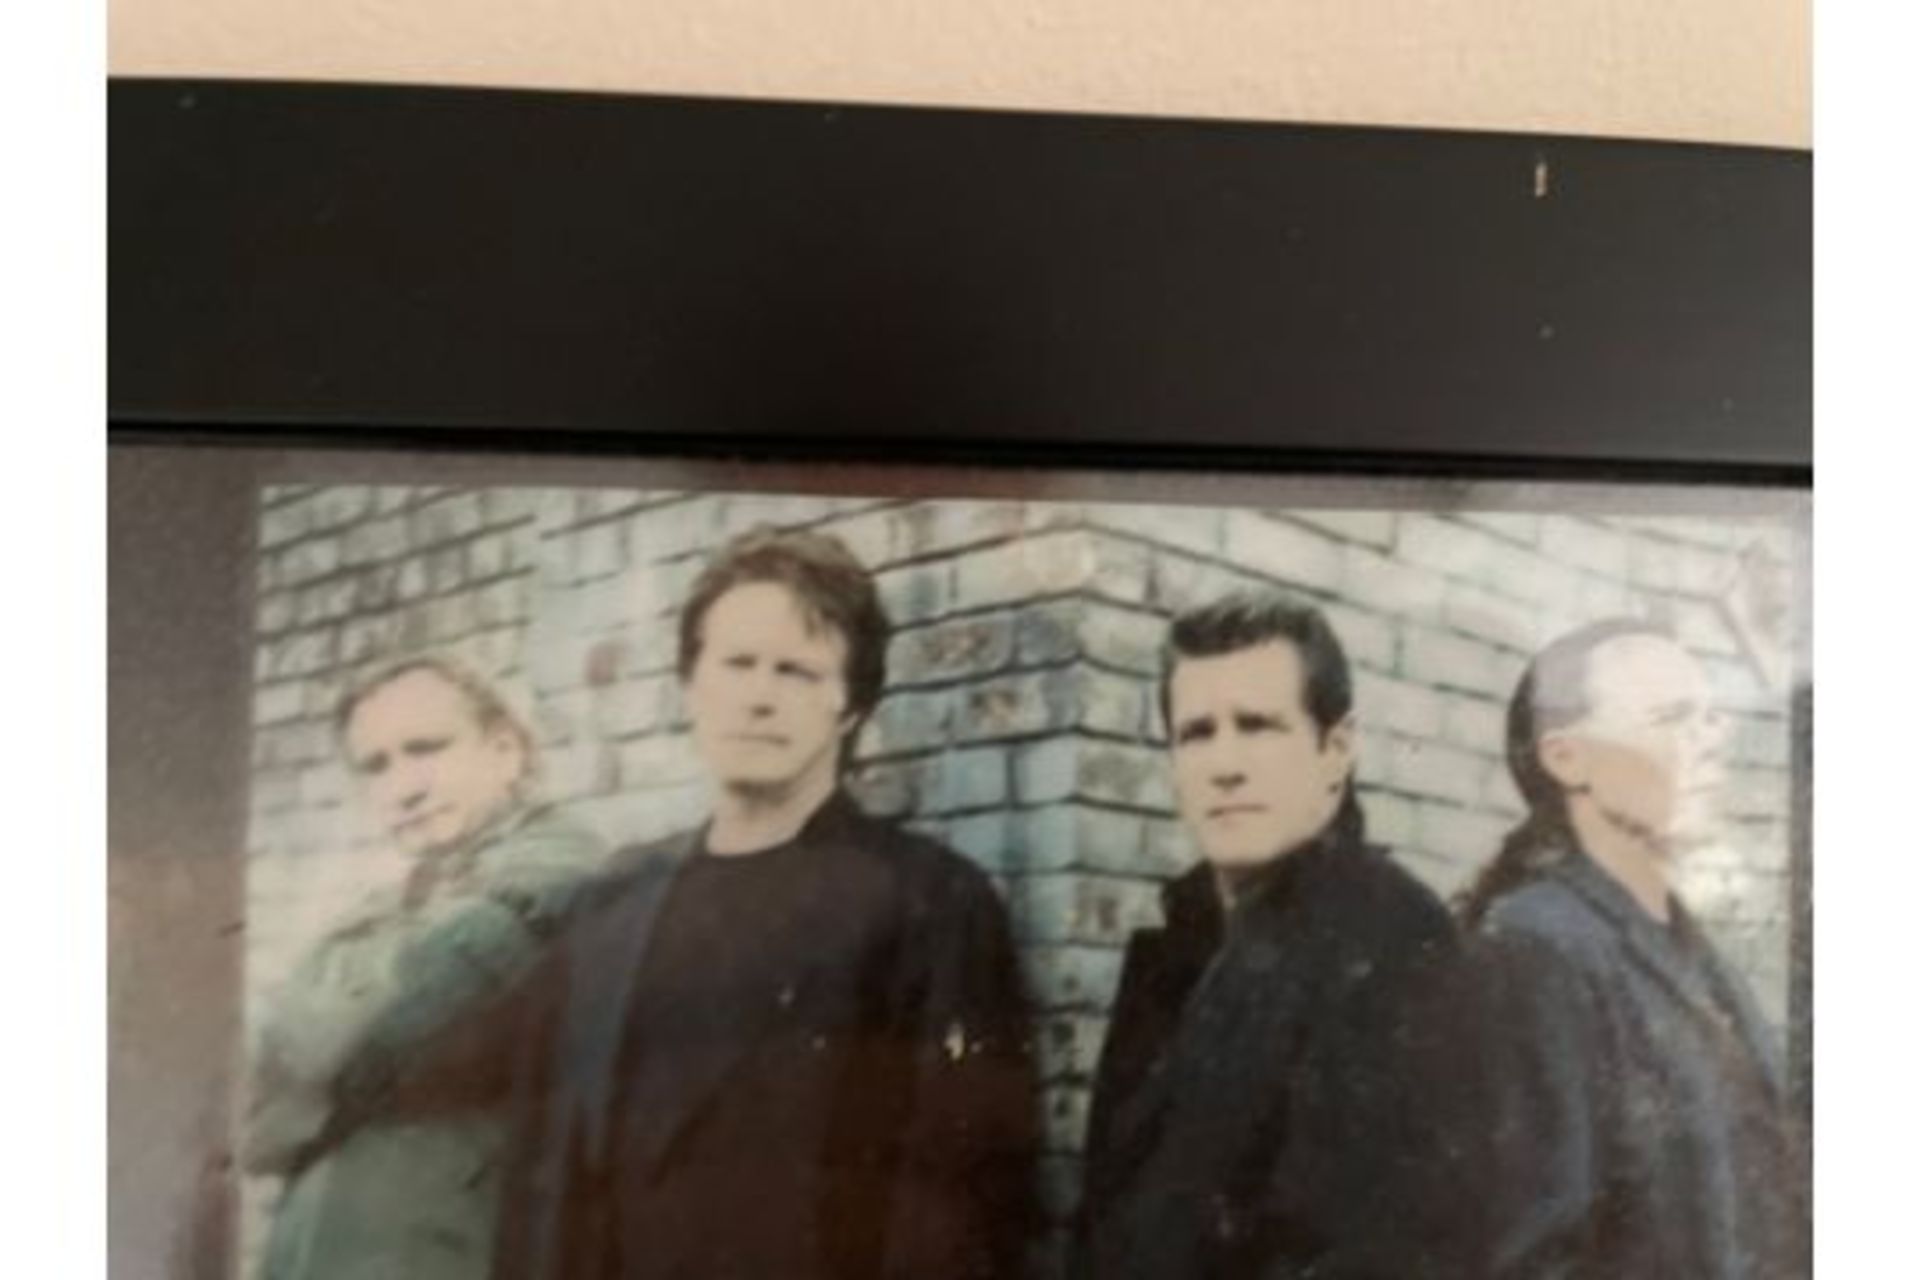 Very Rare Large Signed Framed Phots of the Eagles in Concert - Image 6 of 10